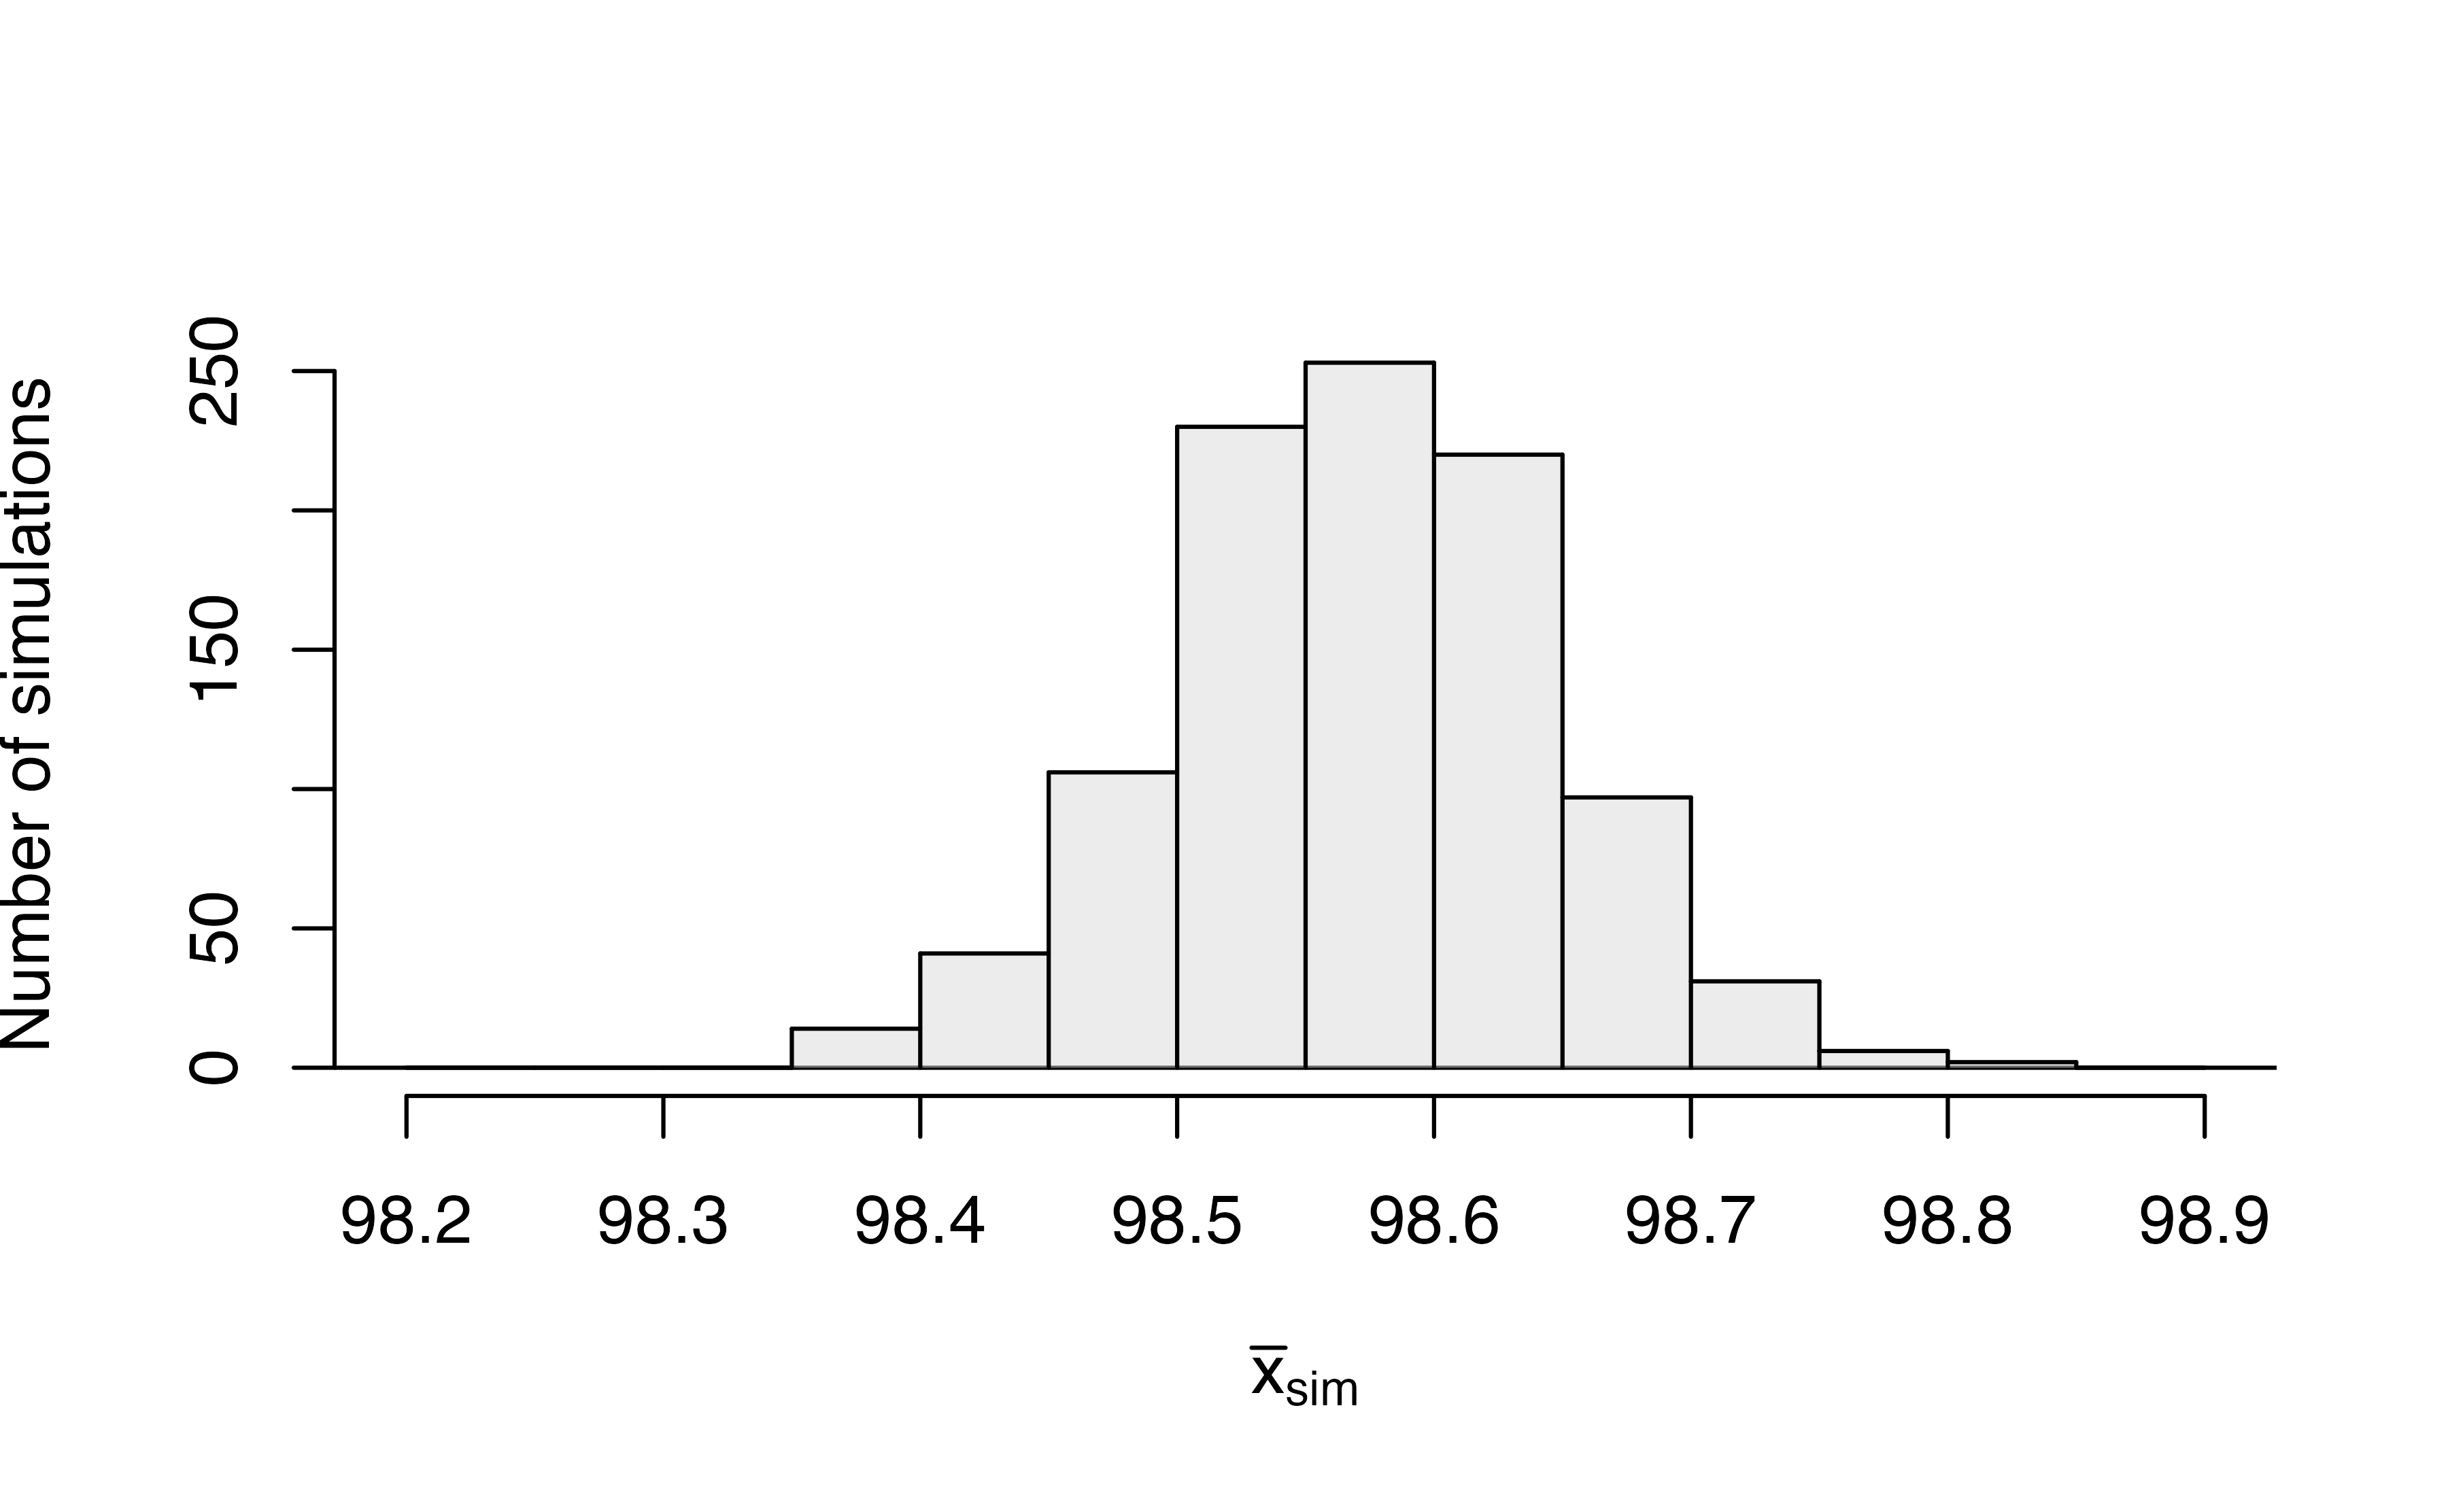 Bootstrapped null distribution of sample mean temperatures assuming the true mean temperature is 98.6 degrees F.